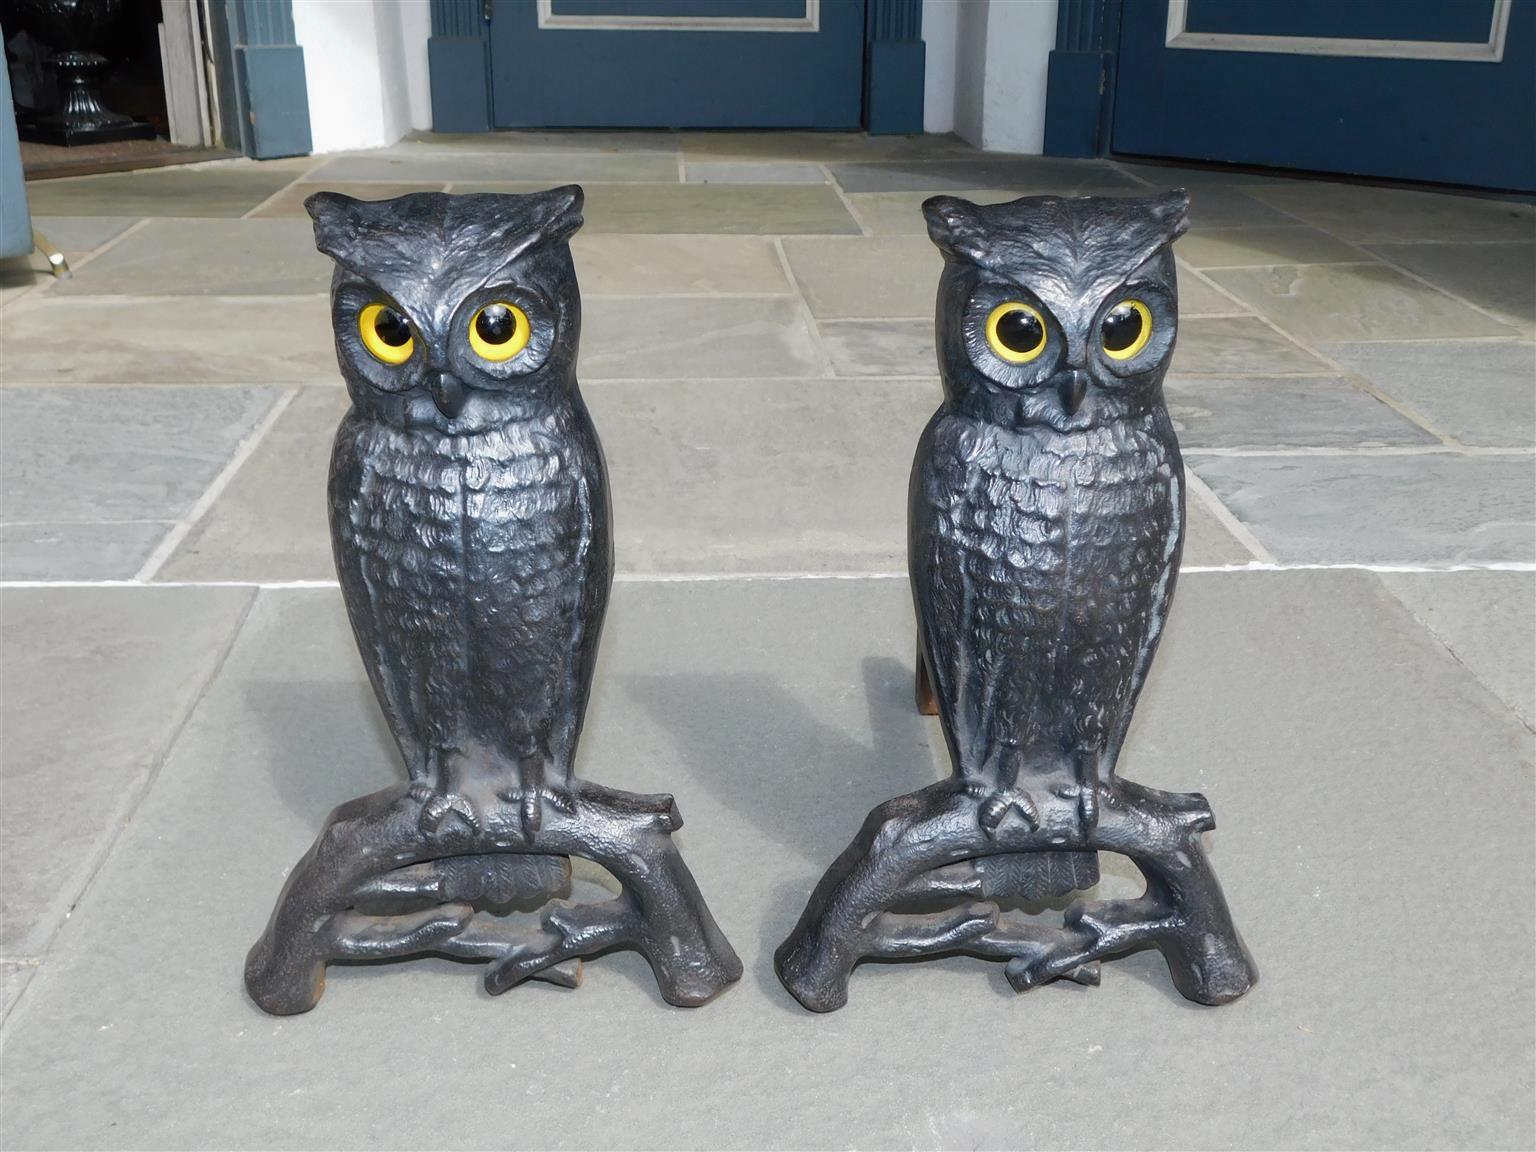 Pair of American cast iron perched owl andirons with original glass eyes and rear dog legs. Boston, MA, Late 19th century.